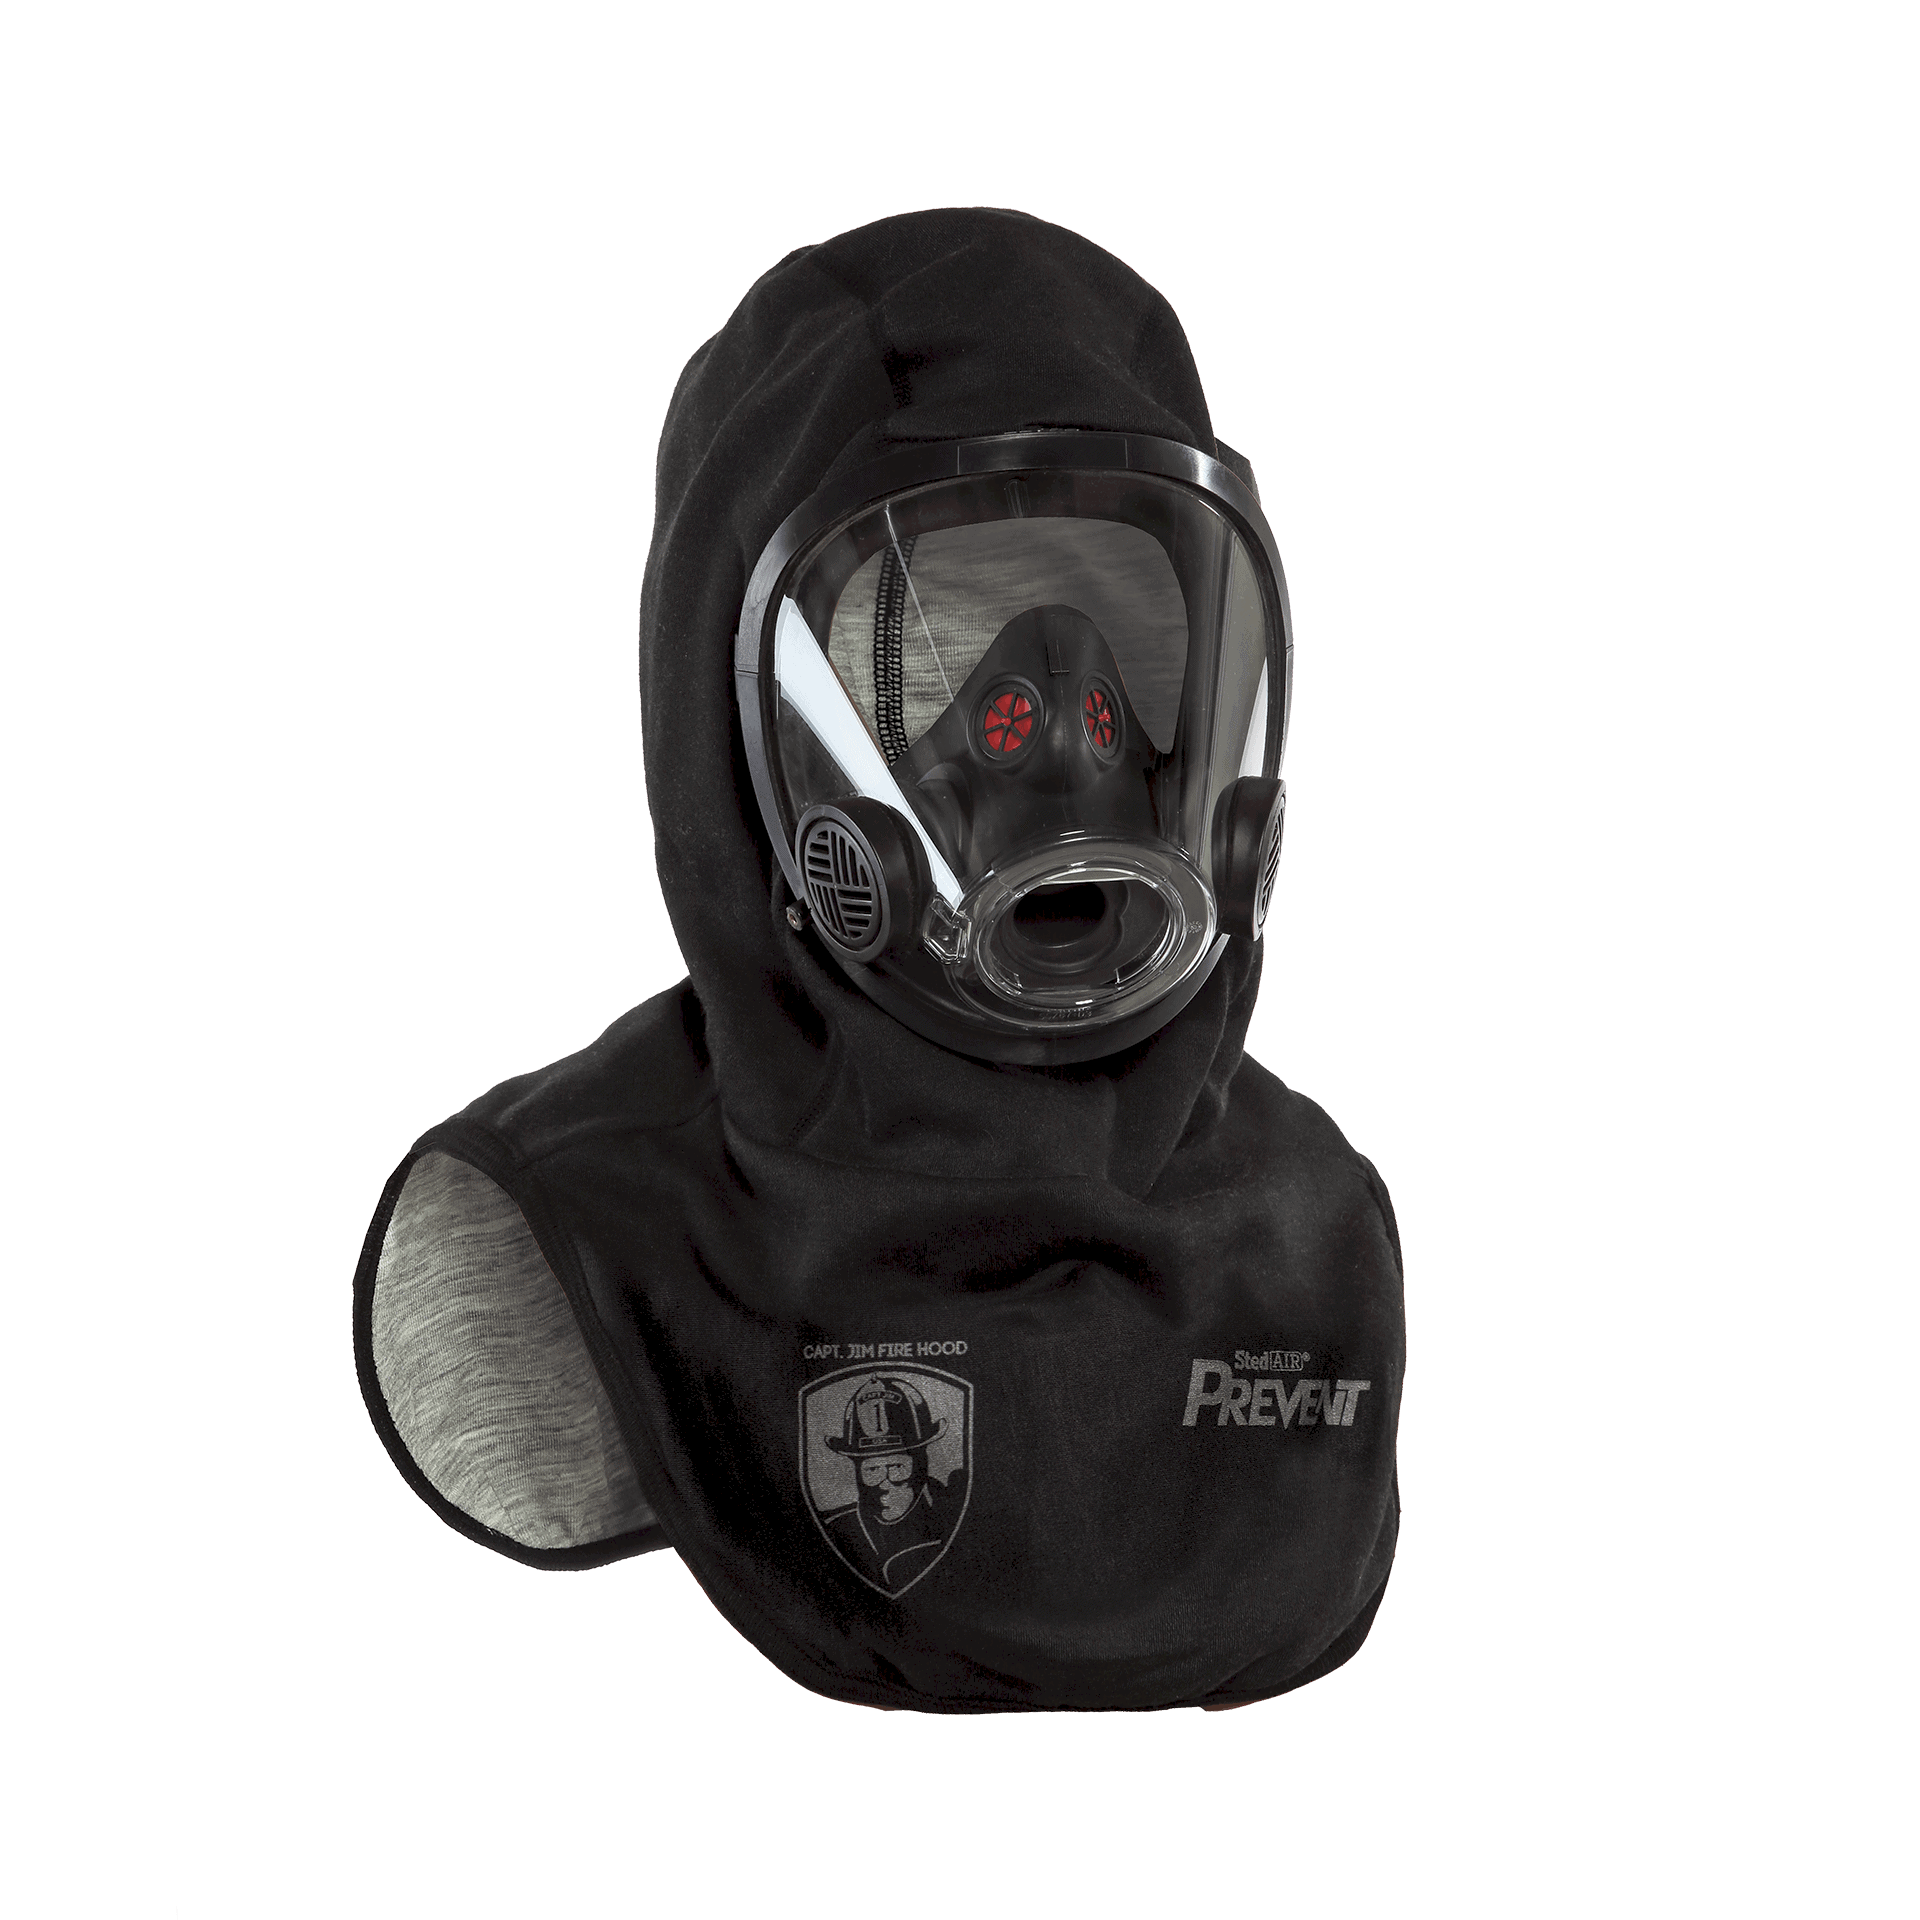 Fire-Dex Captain Jim Hood with StedAIR Prevent | The Fire Center | Fuego Fire Center | Store | FIREFIGHTER GEAR | FREE SHIPPING | If you’re concerned about thermal protection, the Captain Jim Fire Hood is an elite choice! With a long-standing reputation for superior TPP and THL performance, this hood is sure to make you a loyal fan.